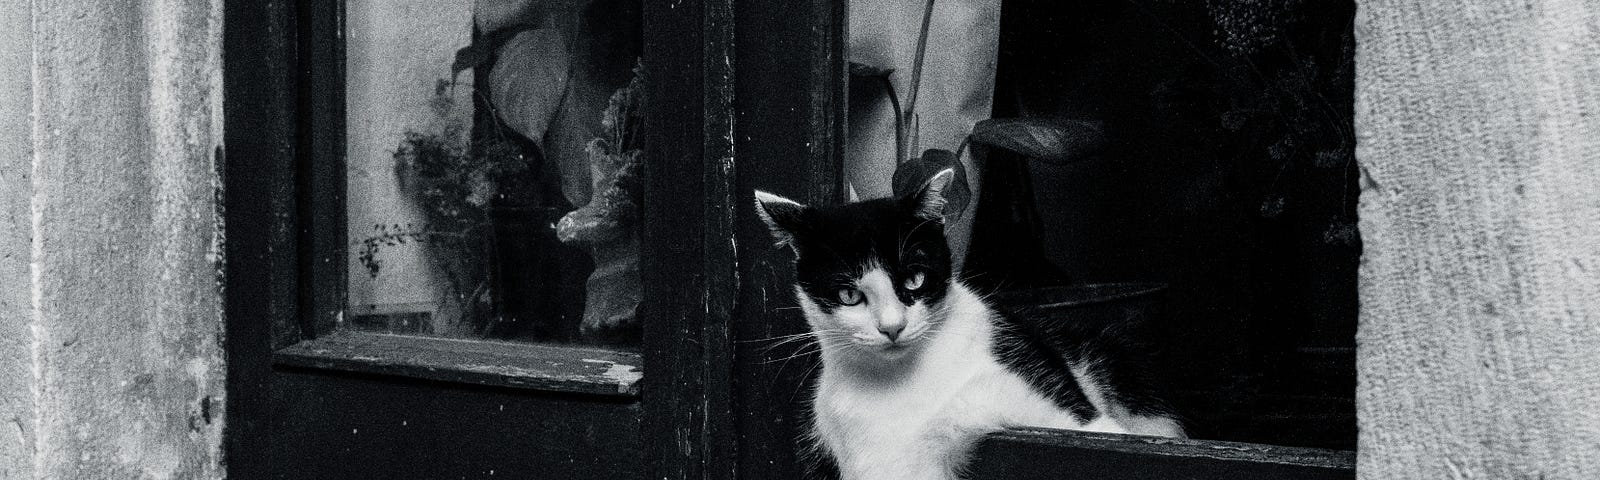 A cat posing in the town of Stari Grad (Old Town), on the Island of Hvar, Croatia.